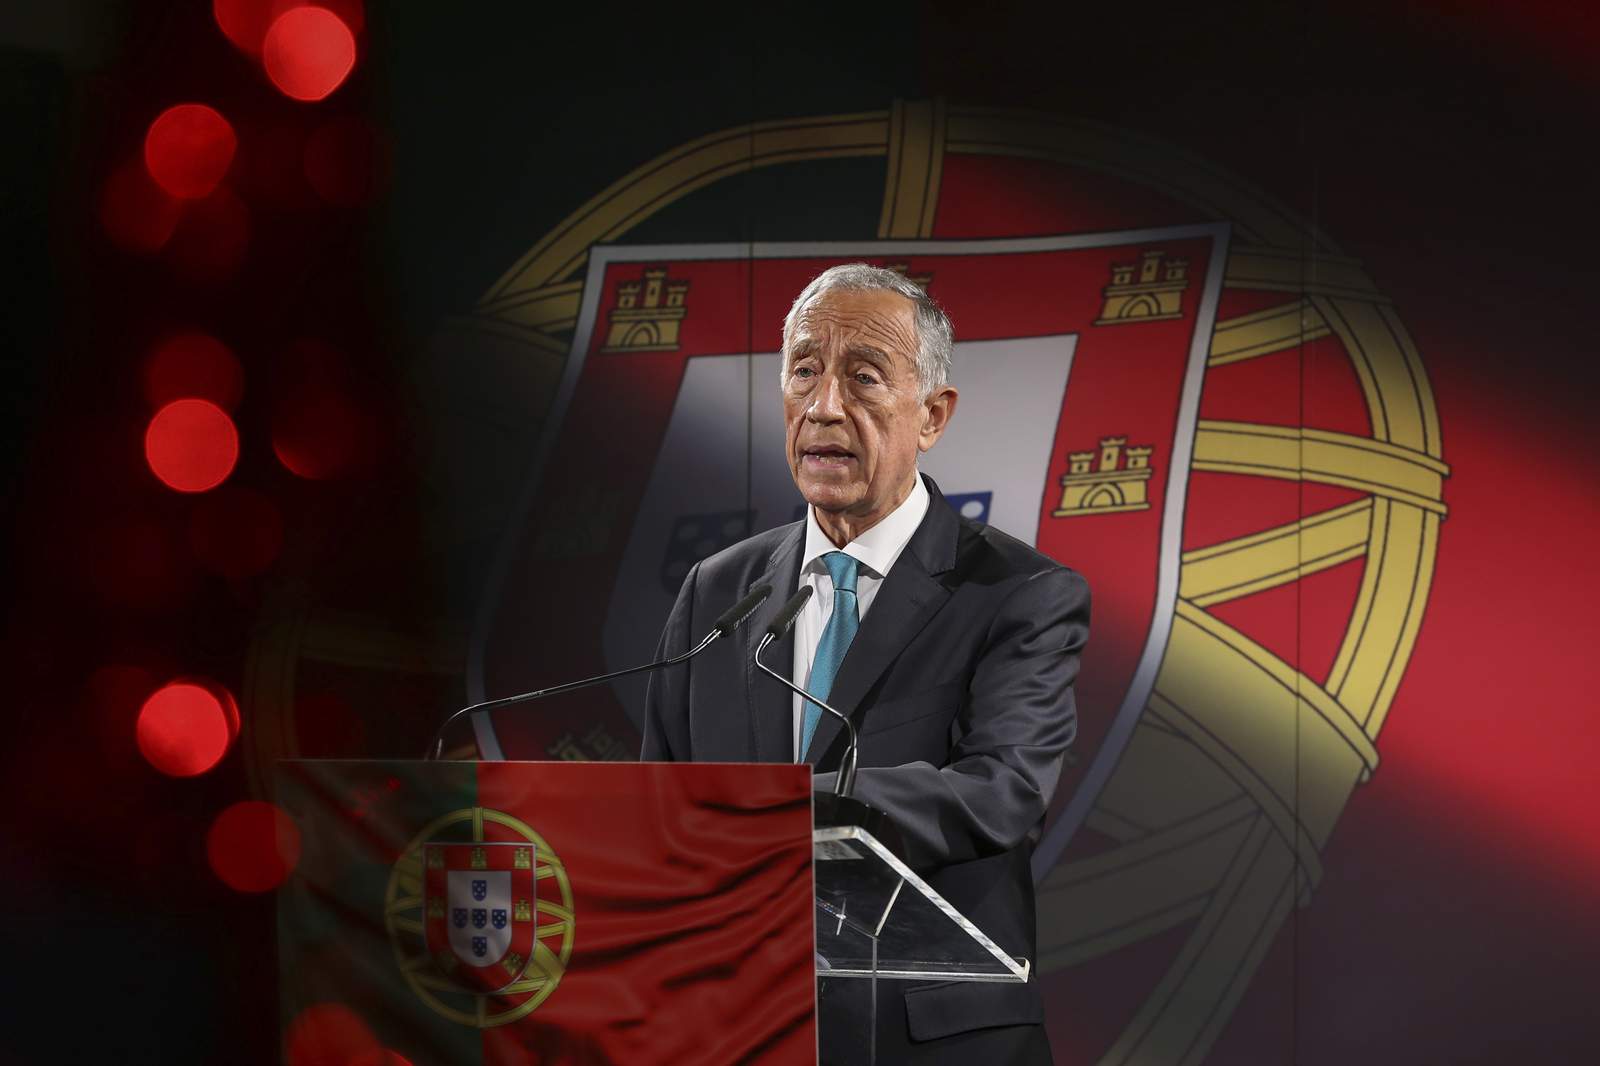 EXPLAINER: A look at Portugal's presidential election